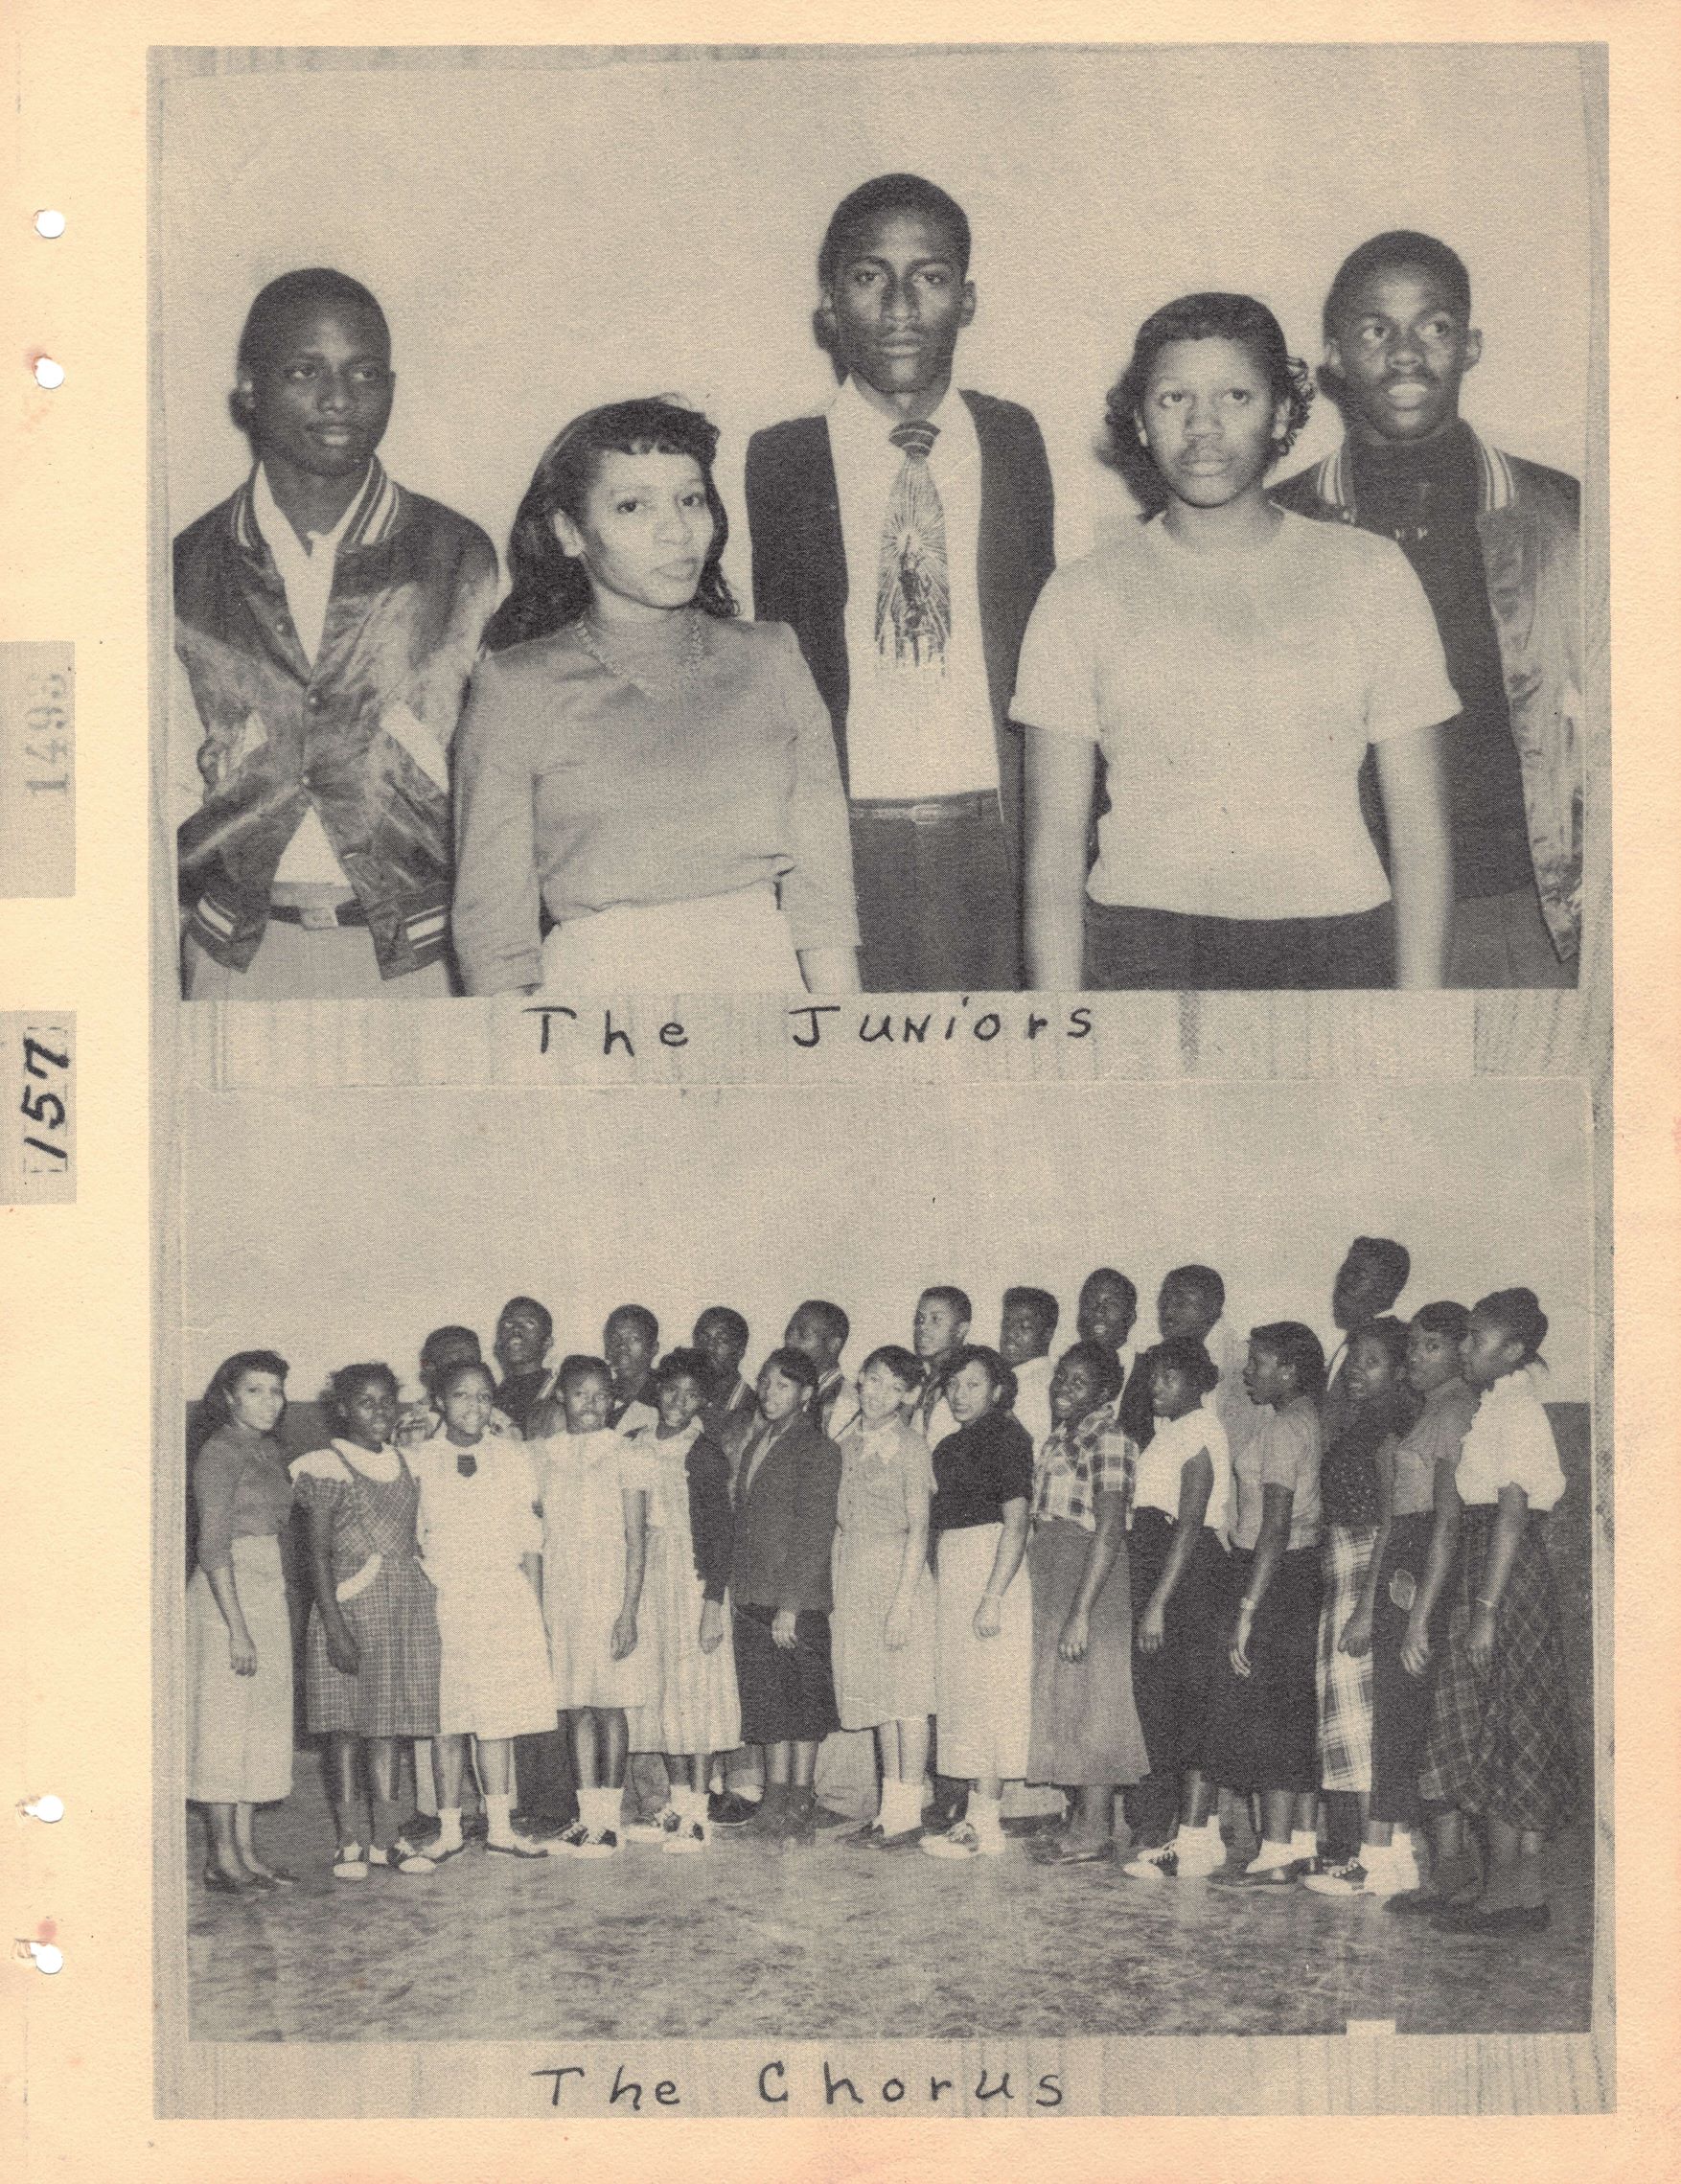 Picture of two women and three men labled "The Juniors" above a picture of a large group captioned "The Chorus"